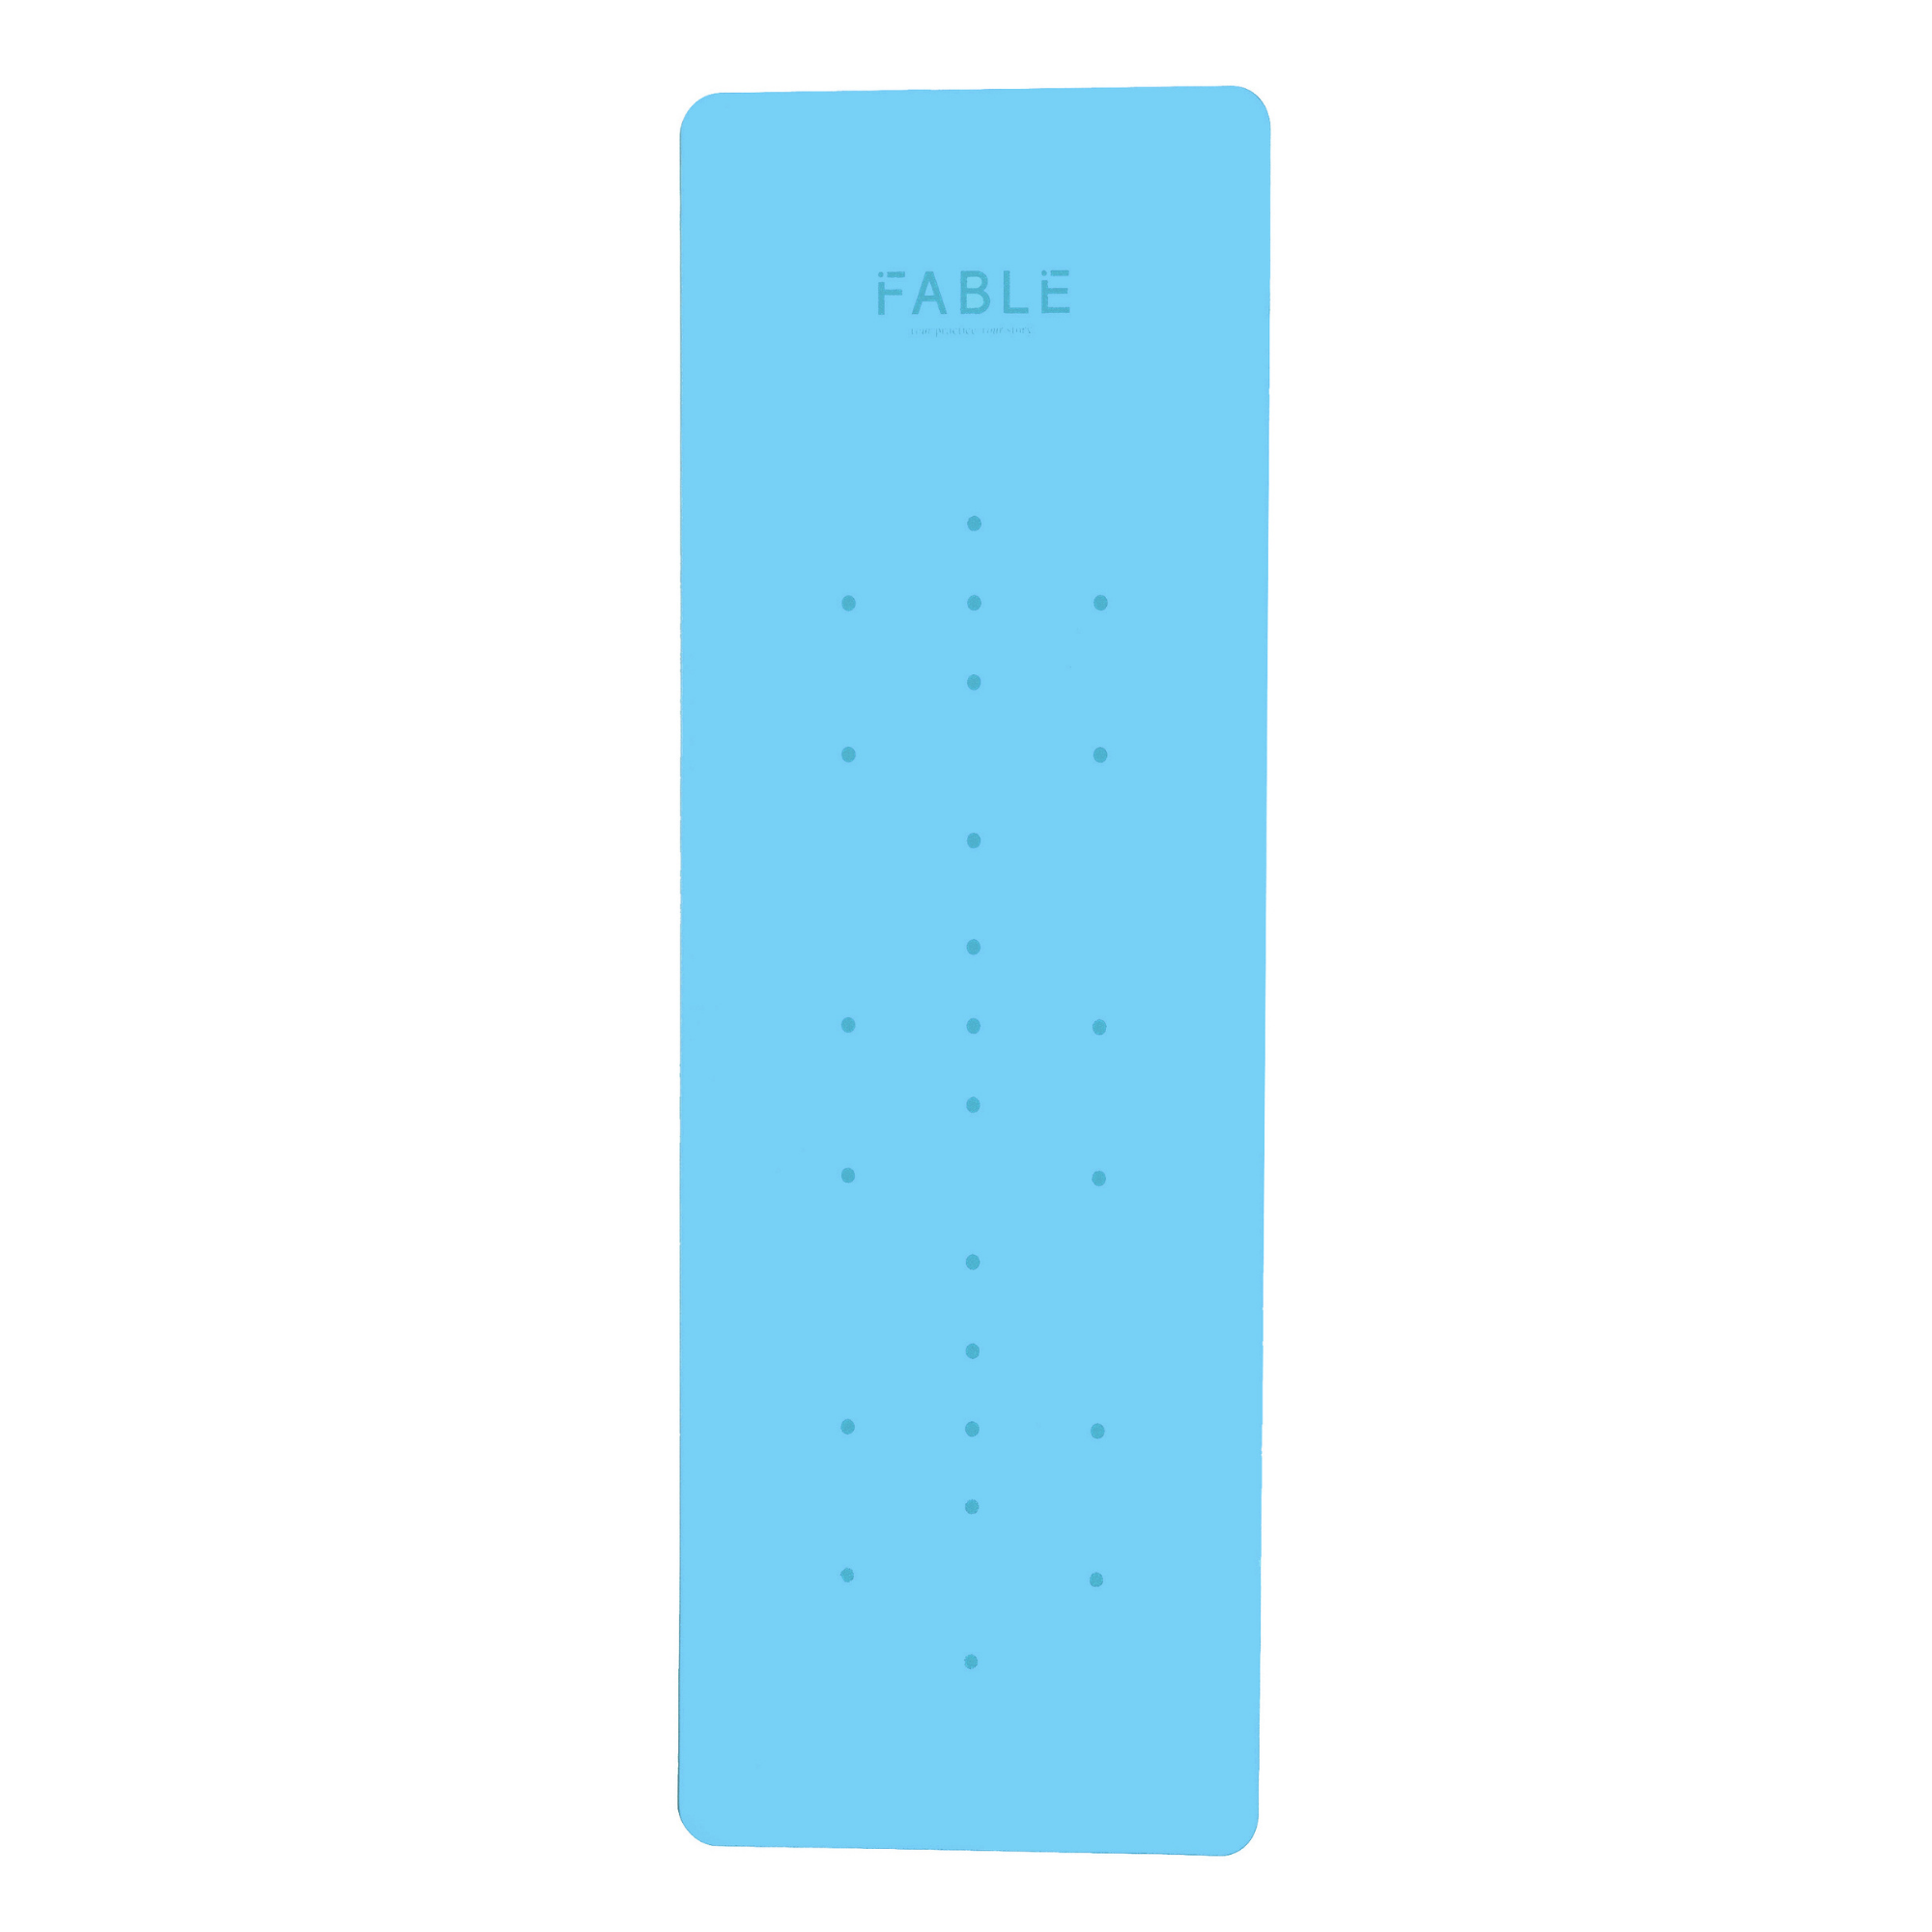 Sky Blue Yoga Mat from Fable Yoga - 4mm Pro Grip